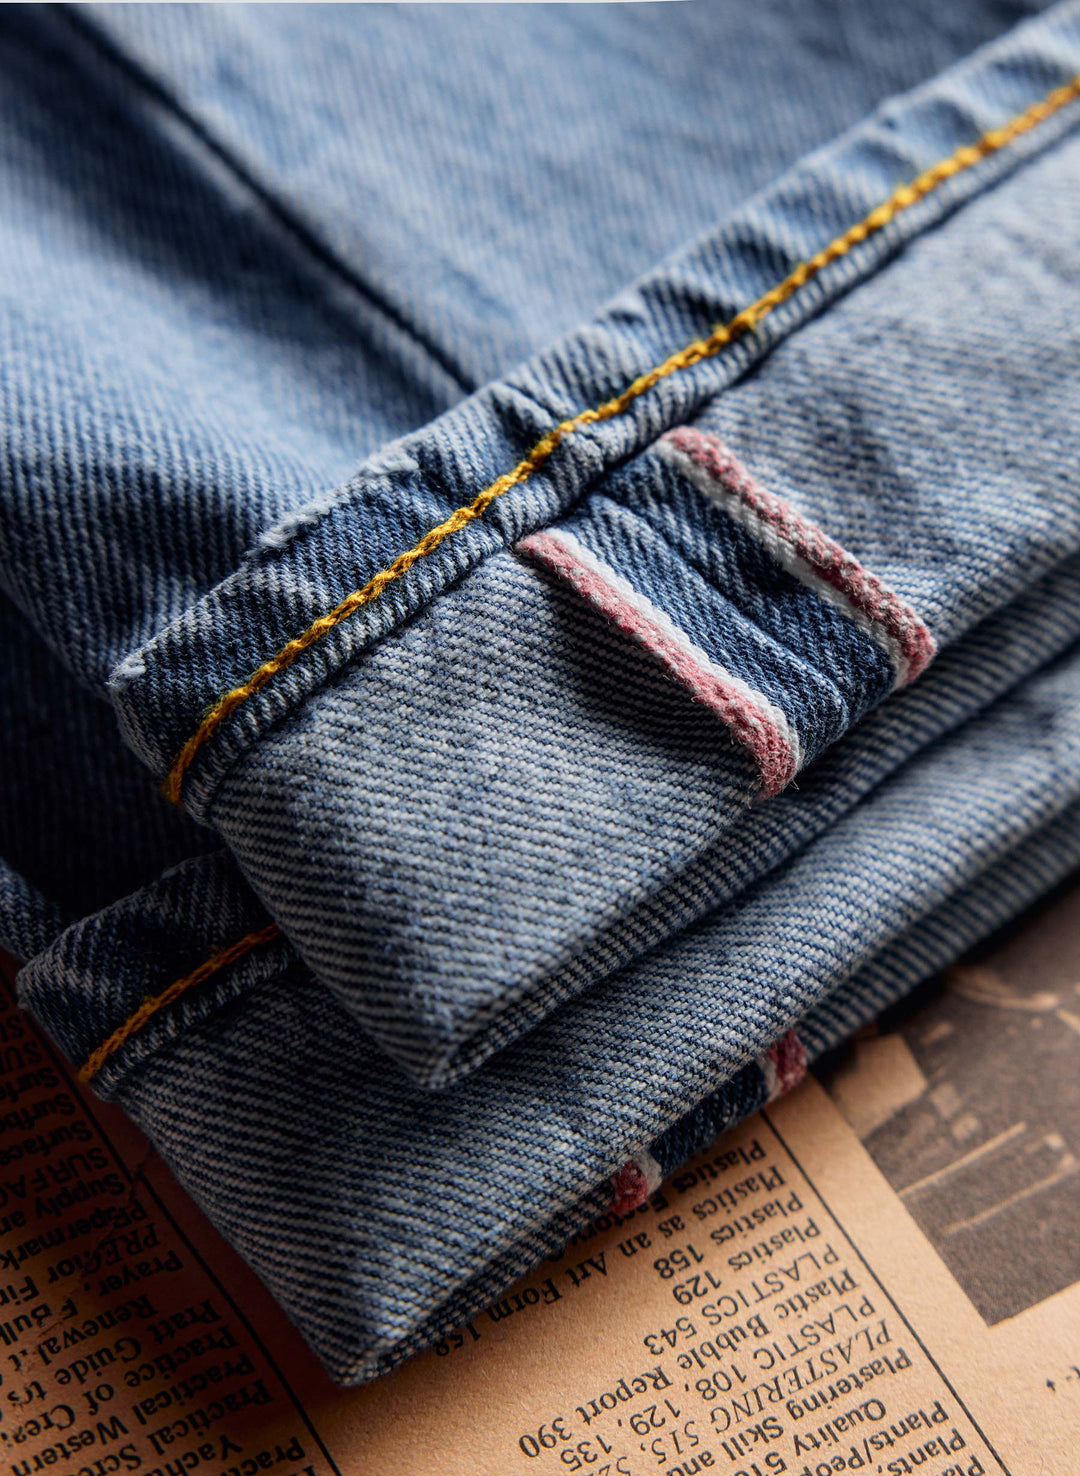 a pair of jeans folded on a newspaper